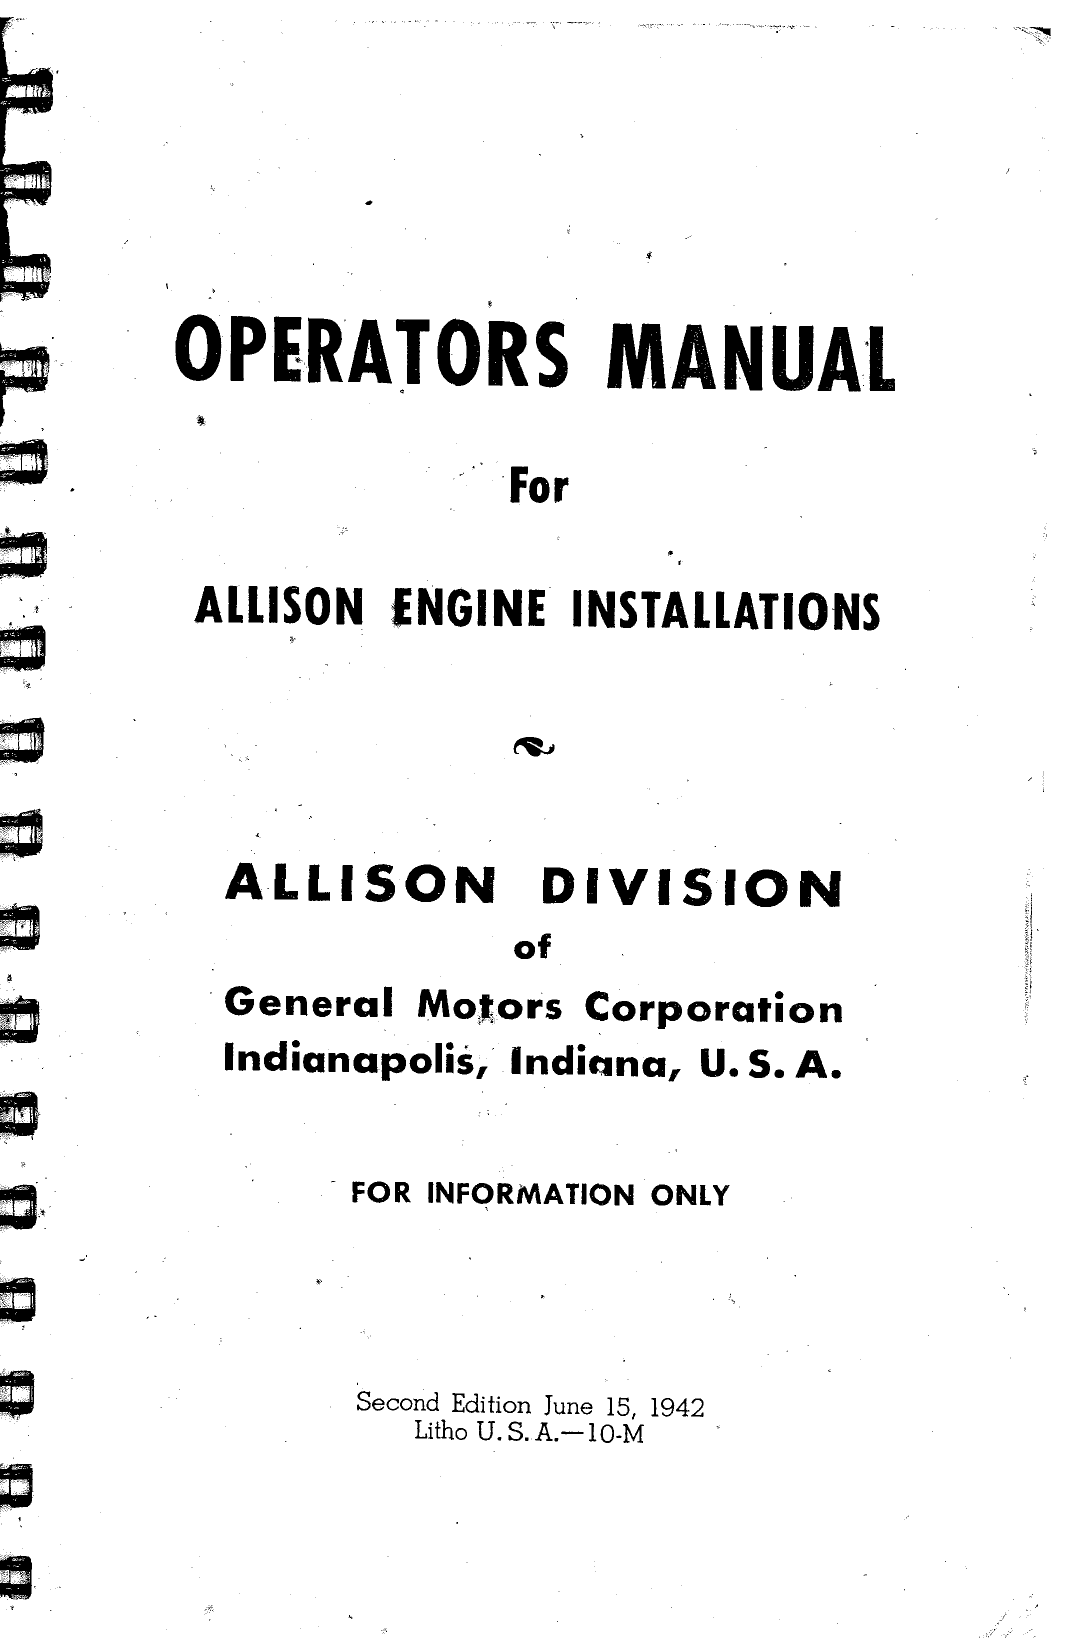 Sample page 1 from AirCorps Library document: Operators Manual - Allison V-1710 Engine Installation